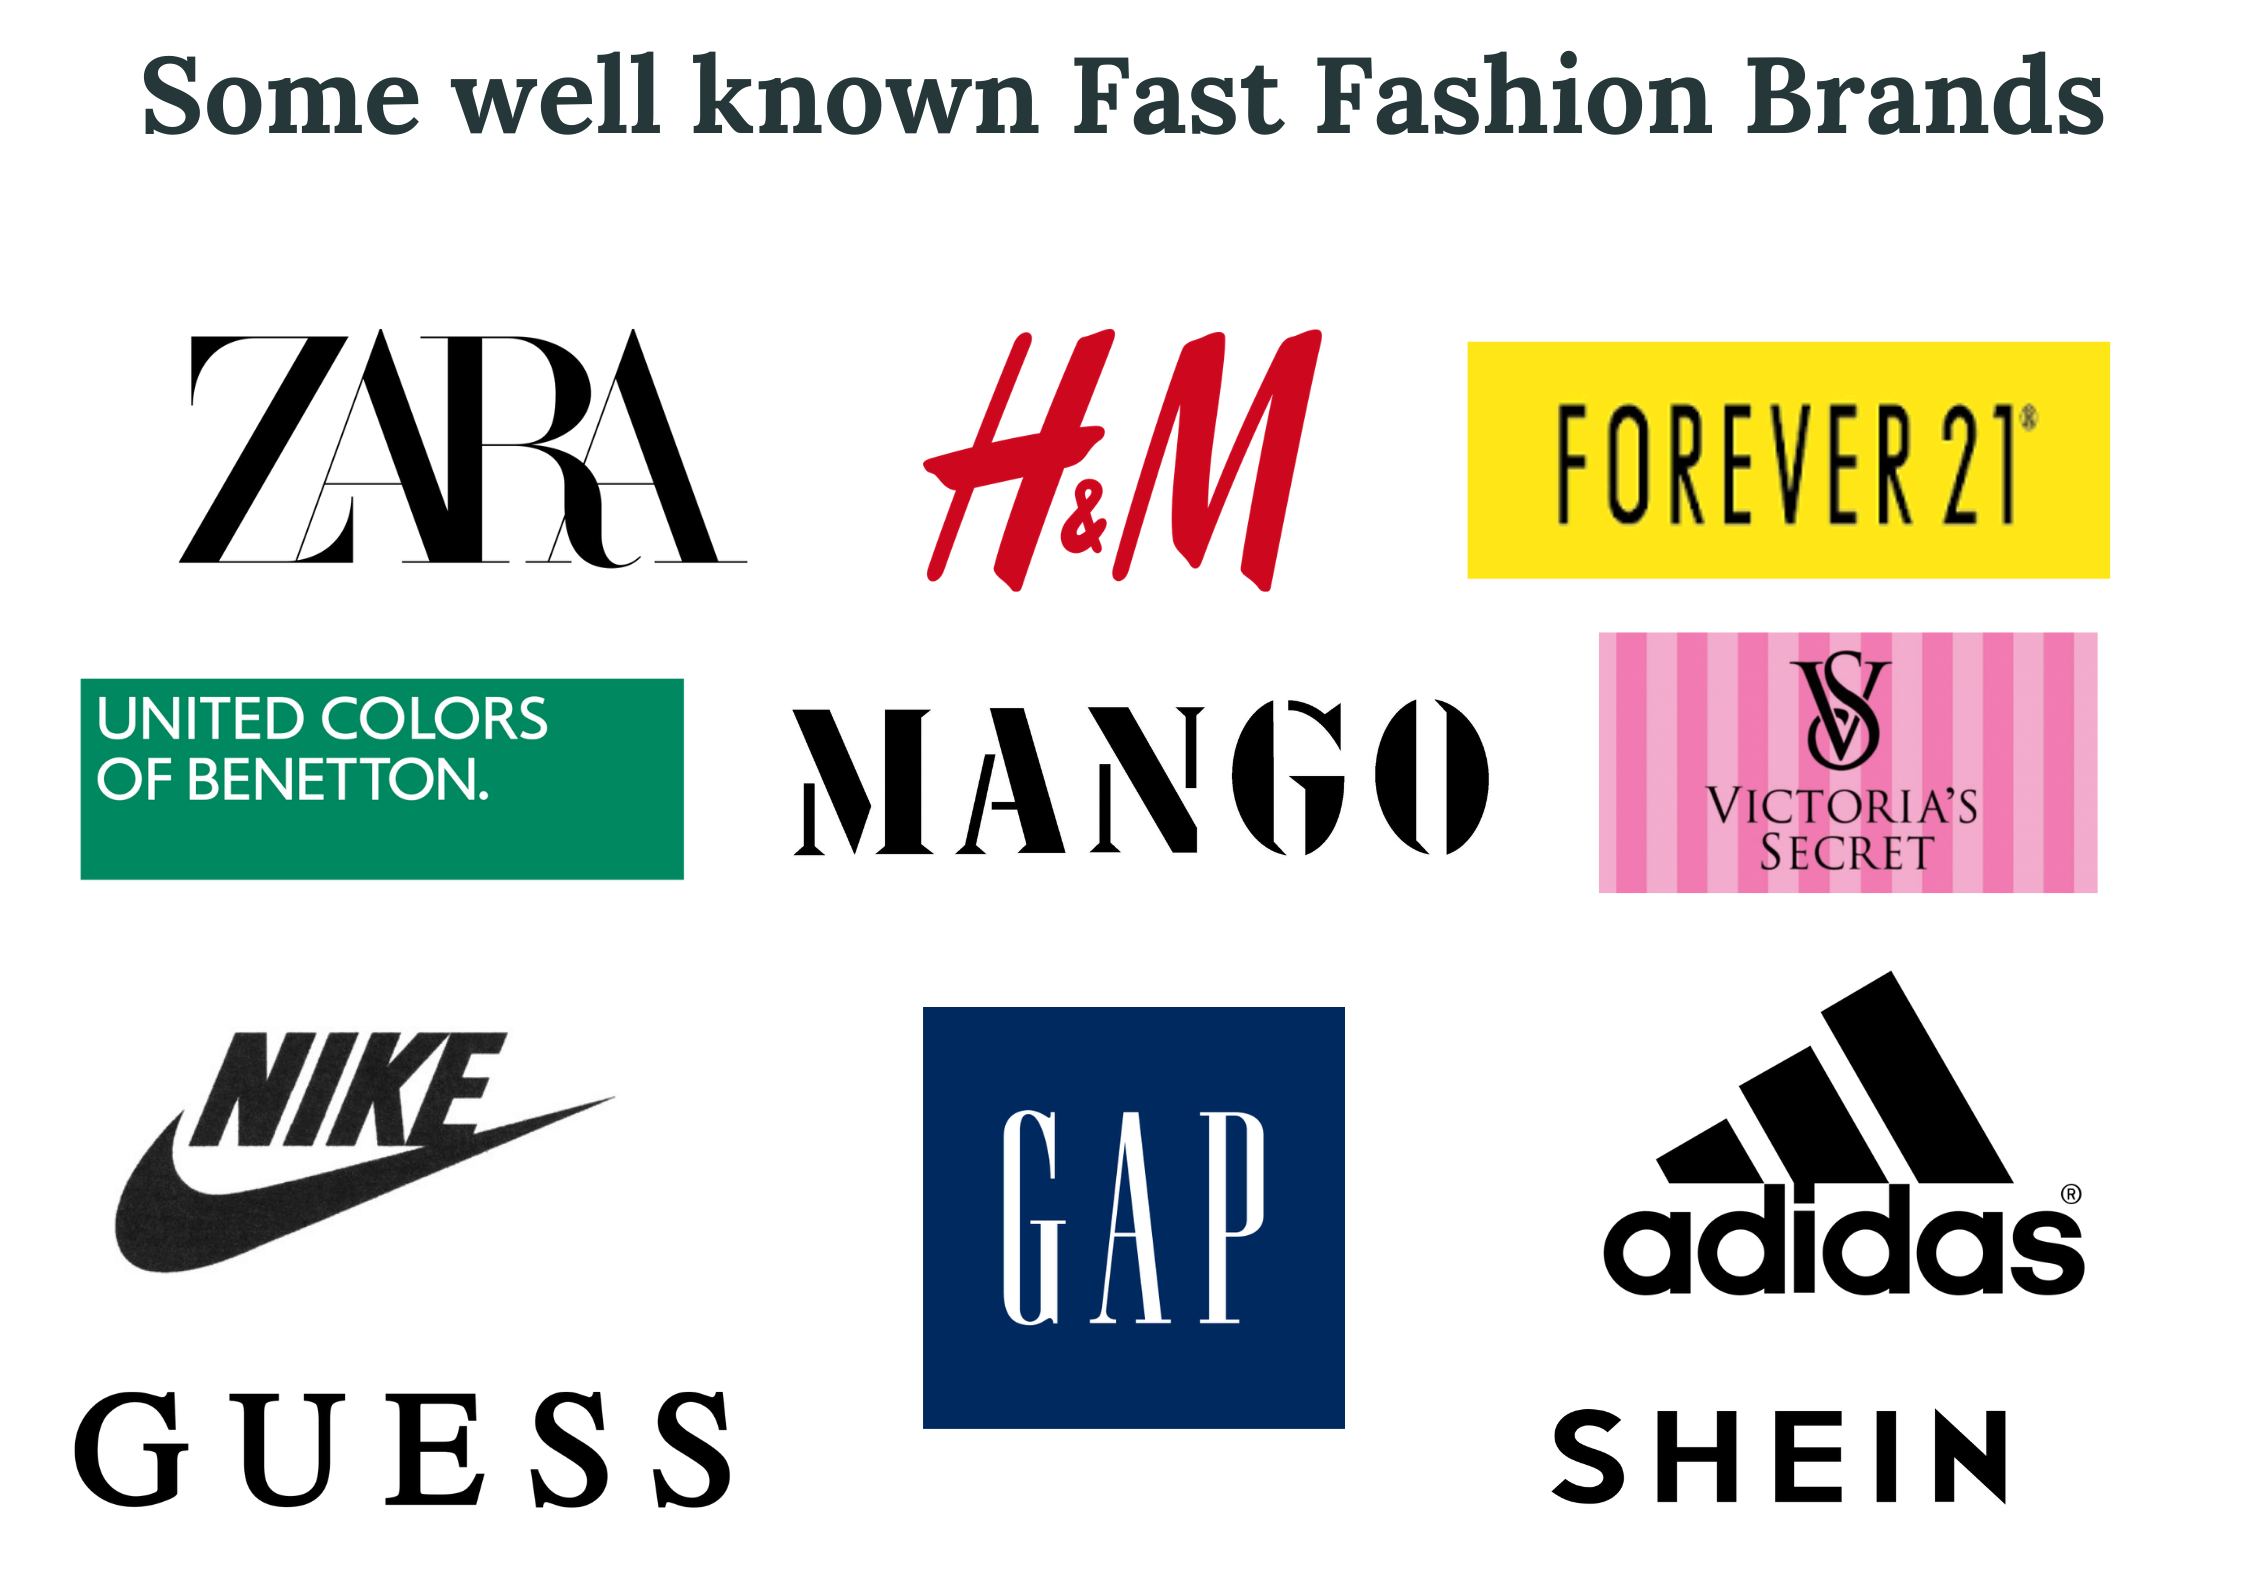 Some Of The Fast Fashion Brands 1 